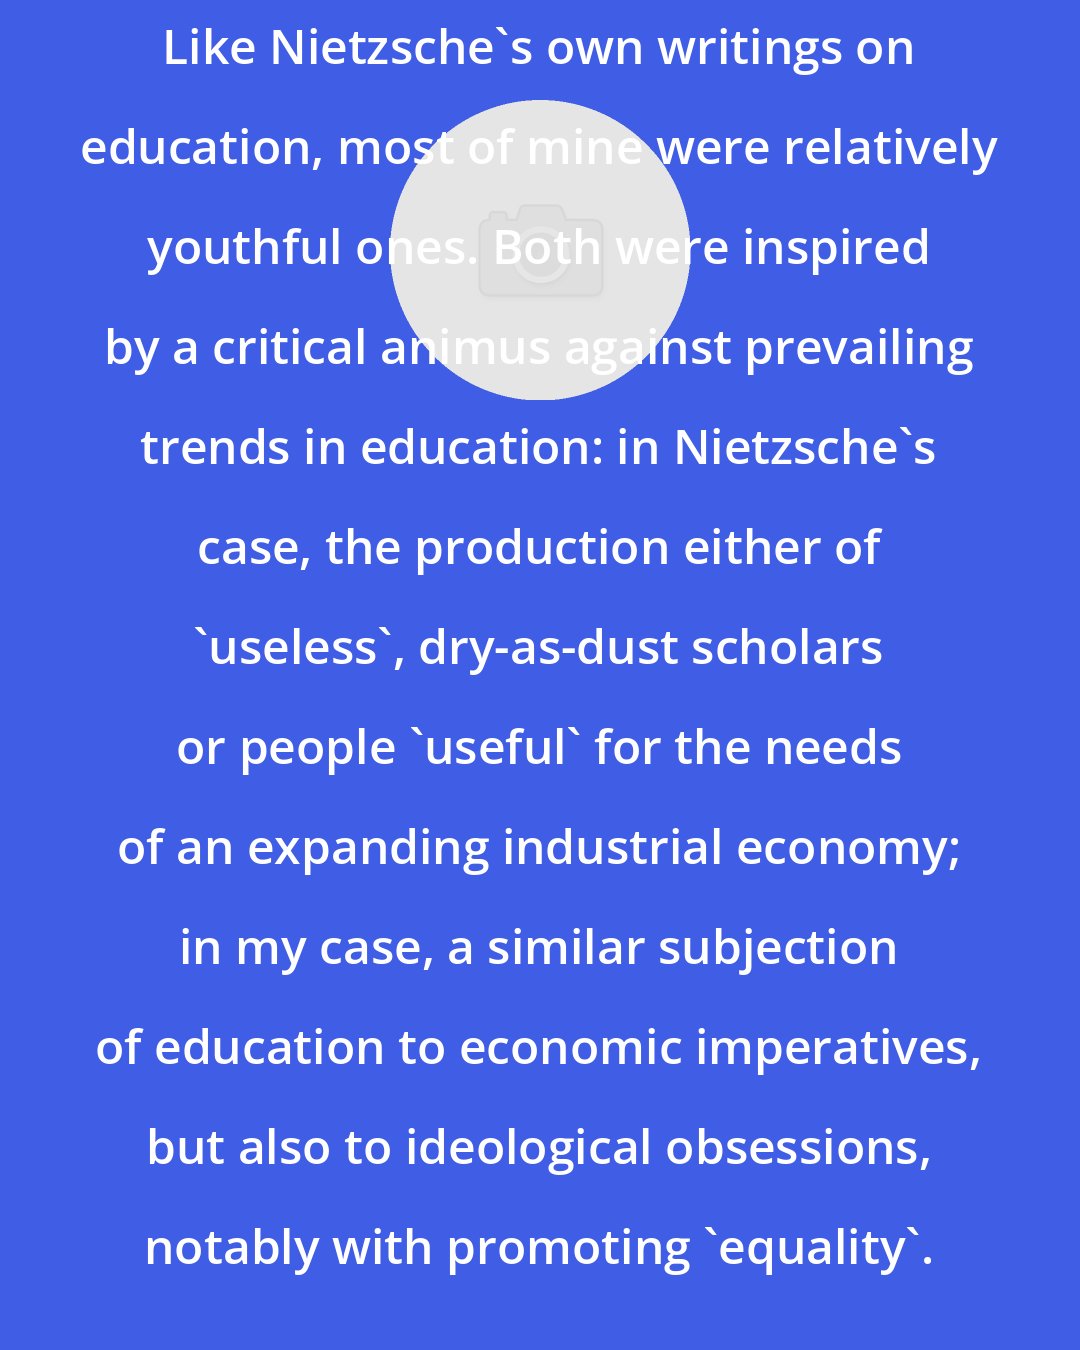 David E. Cooper: Like Nietzsche's own writings on education, most of mine were relatively youthful ones. Both were inspired by a critical animus against prevailing trends in education: in Nietzsche's case, the production either of 'useless', dry-as-dust scholars or people 'useful' for the needs of an expanding industrial economy; in my case, a similar subjection of education to economic imperatives, but also to ideological obsessions, notably with promoting 'equality'.